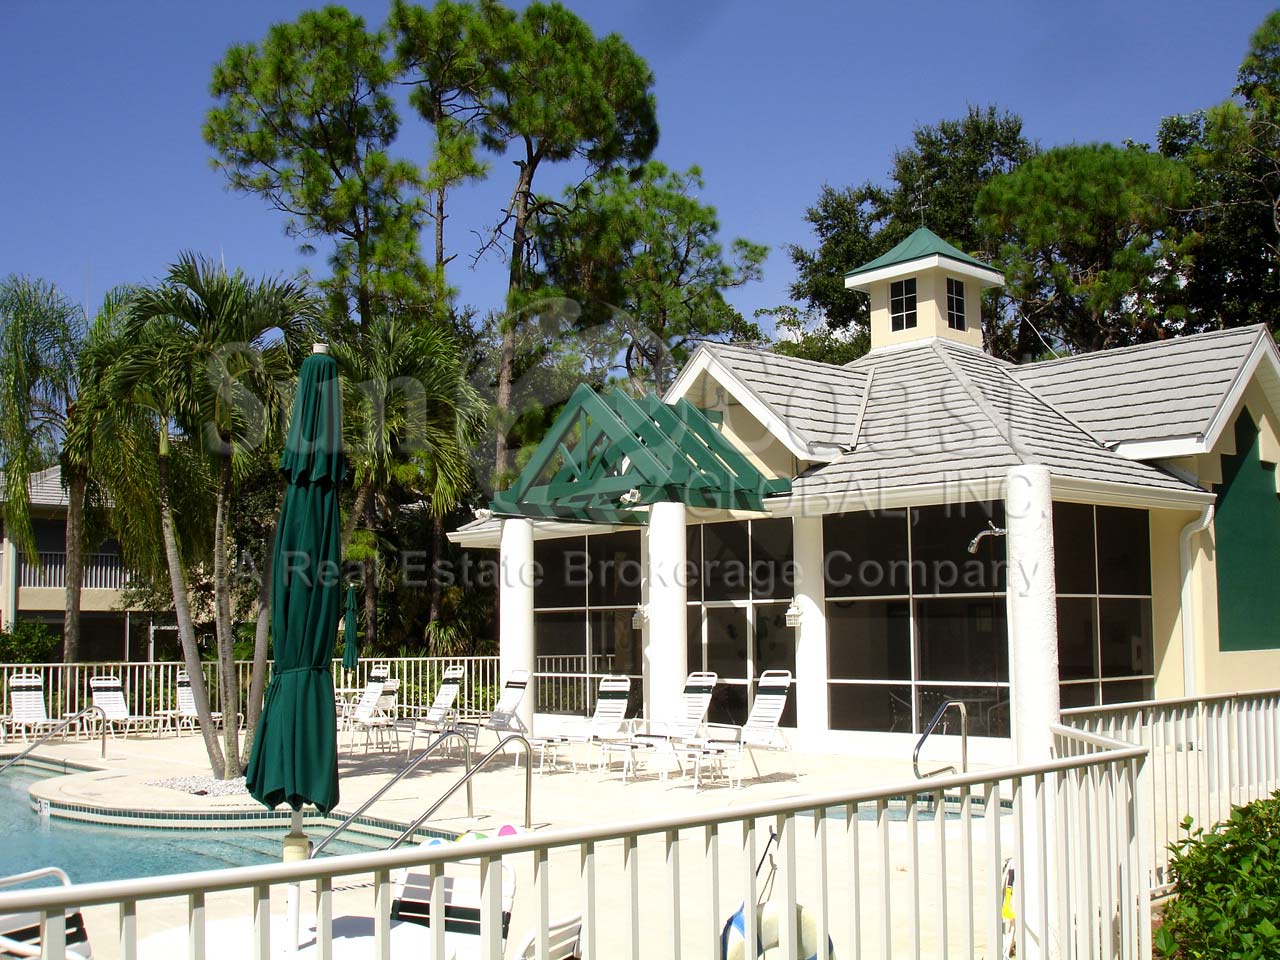 Steeplechase Of Naples Community Pool and Clubhouse